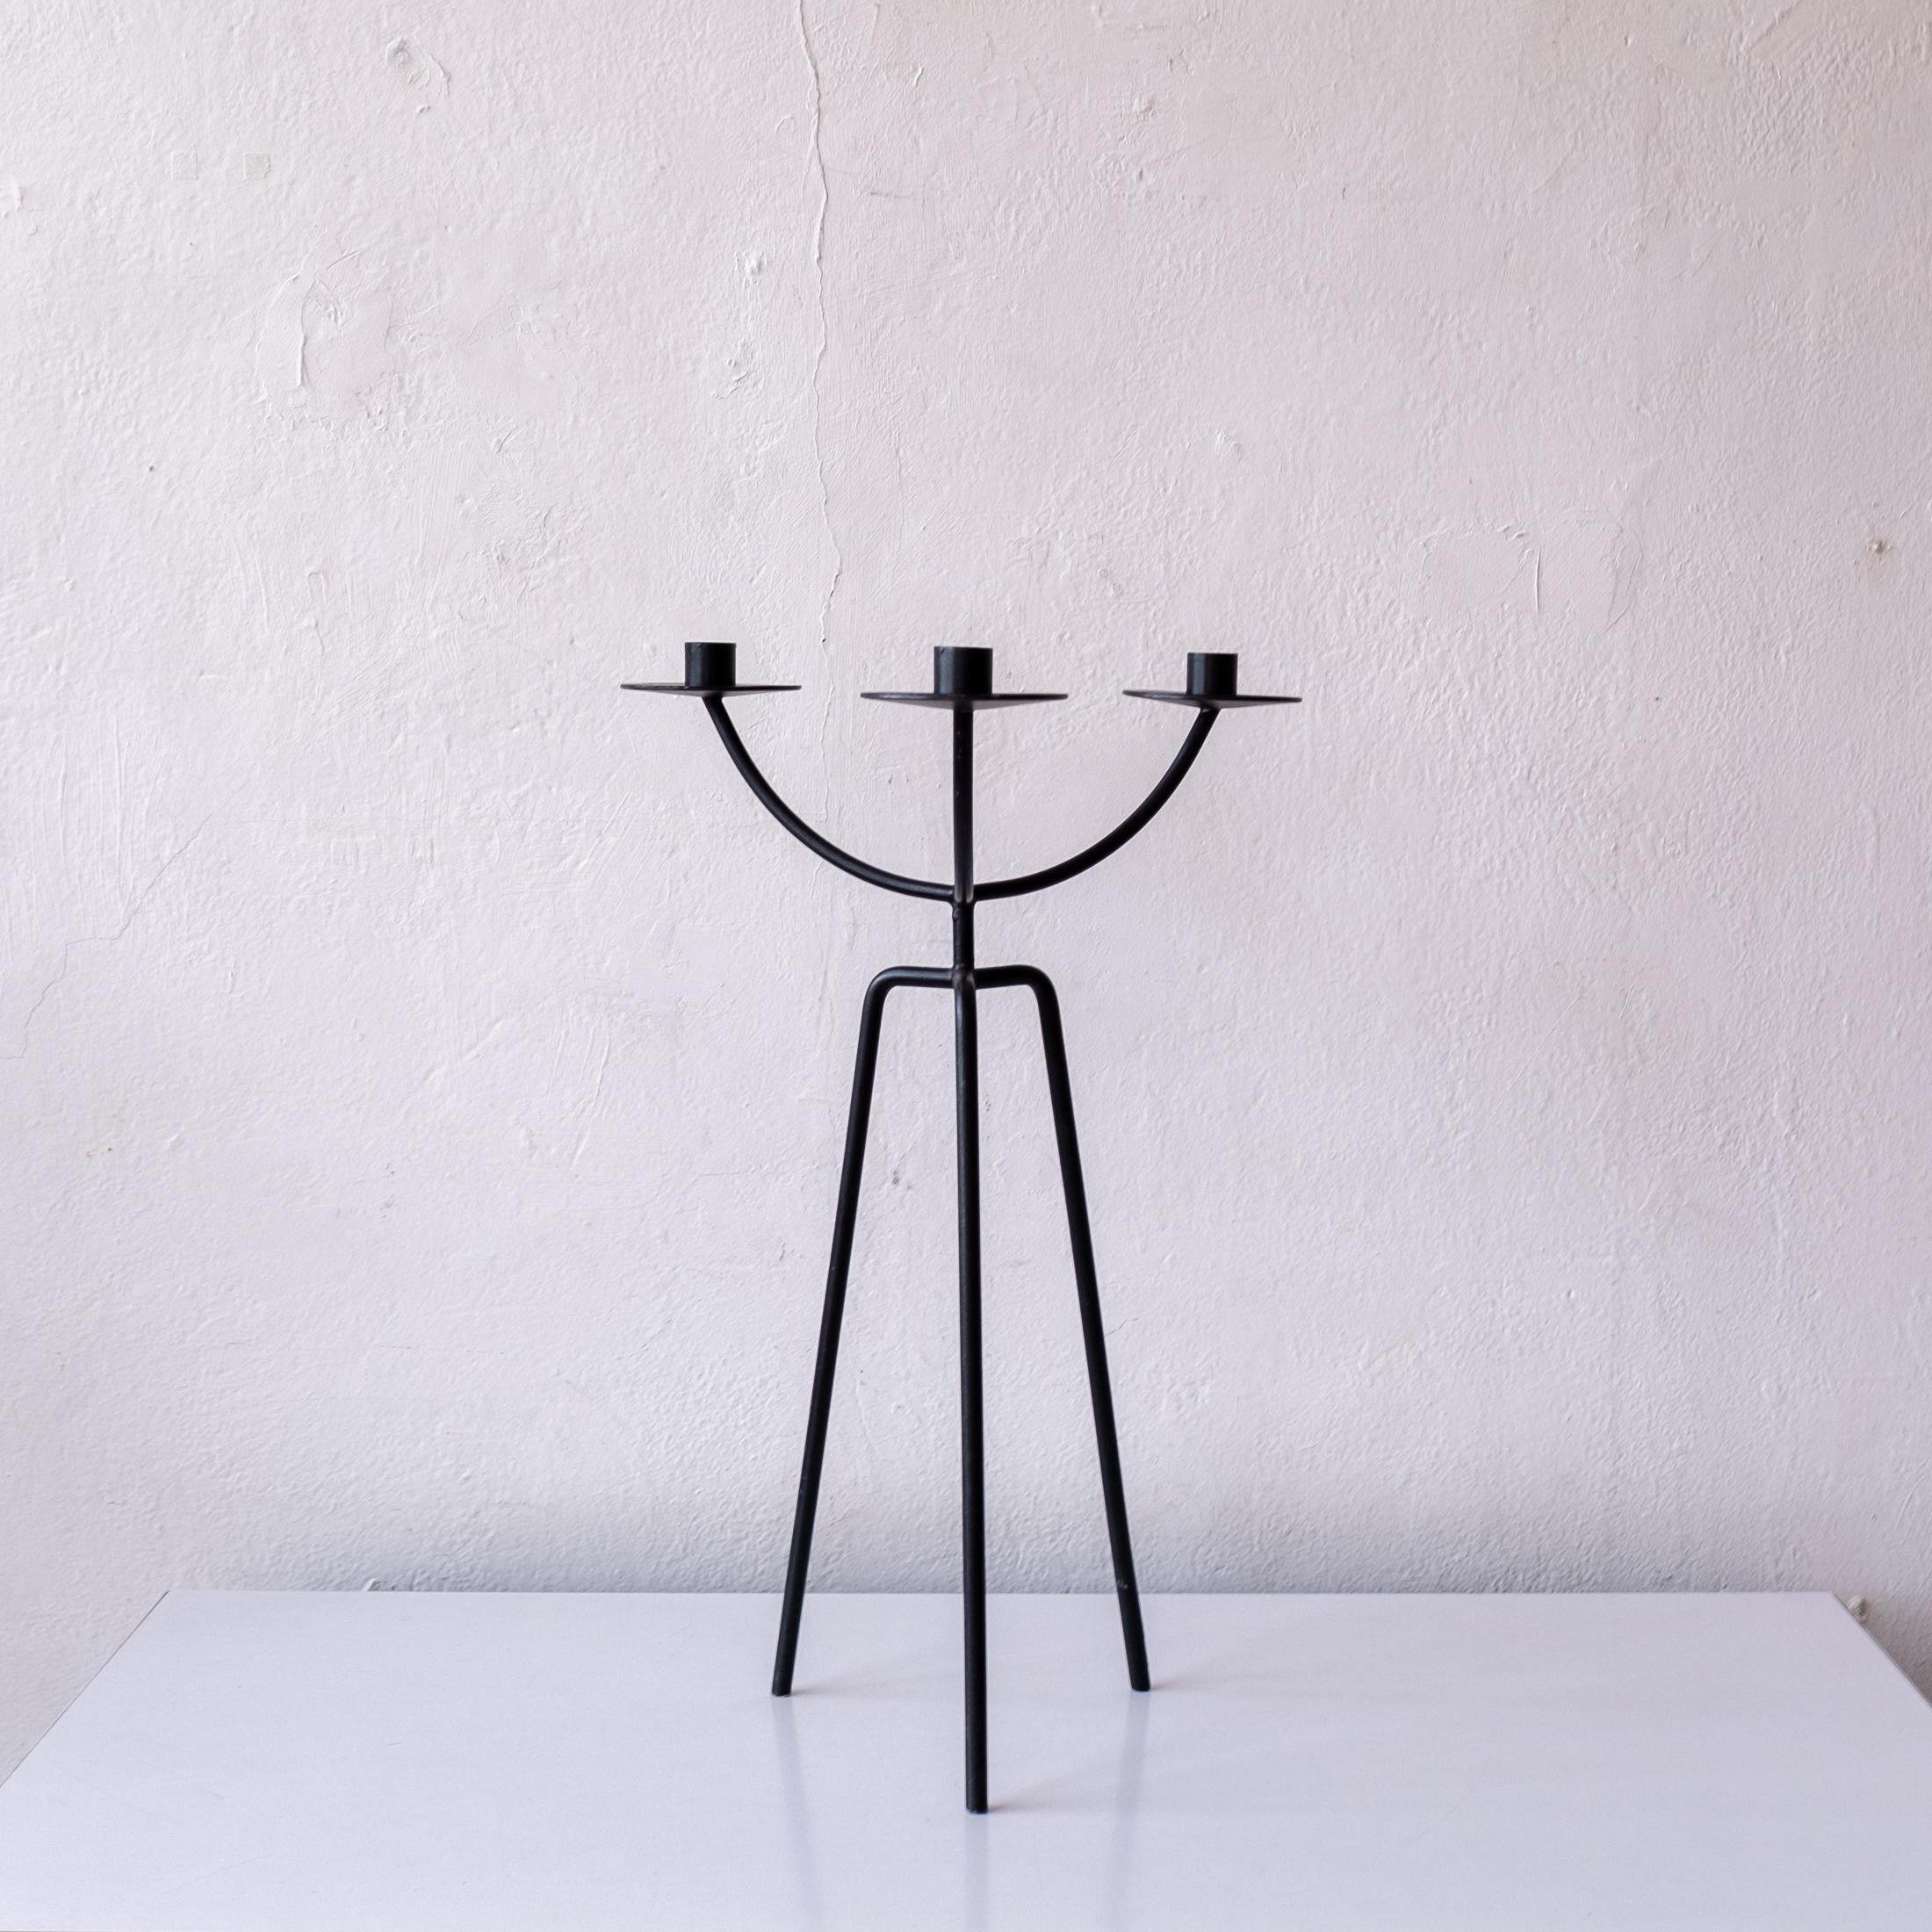 American Midcentury Tripod Iron Candleholder, 1950s For Sale